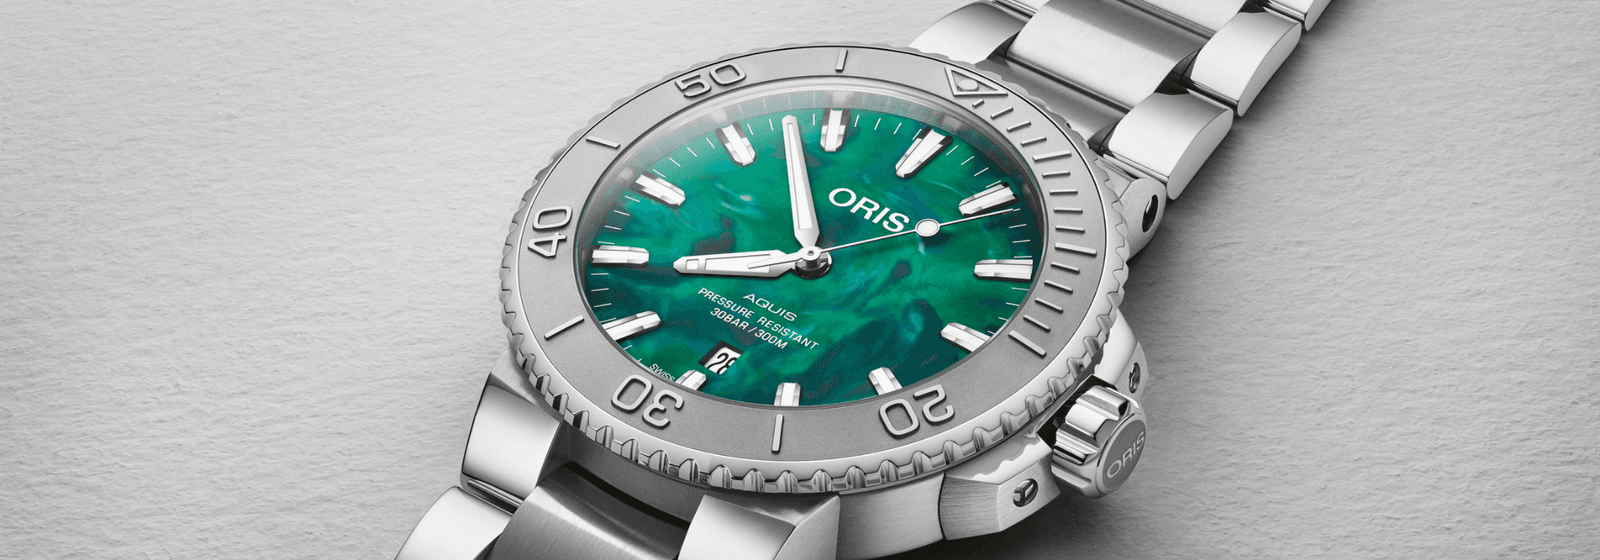 Oris Makes A Sustainable Splash With New Timepieces & A Diver’s First